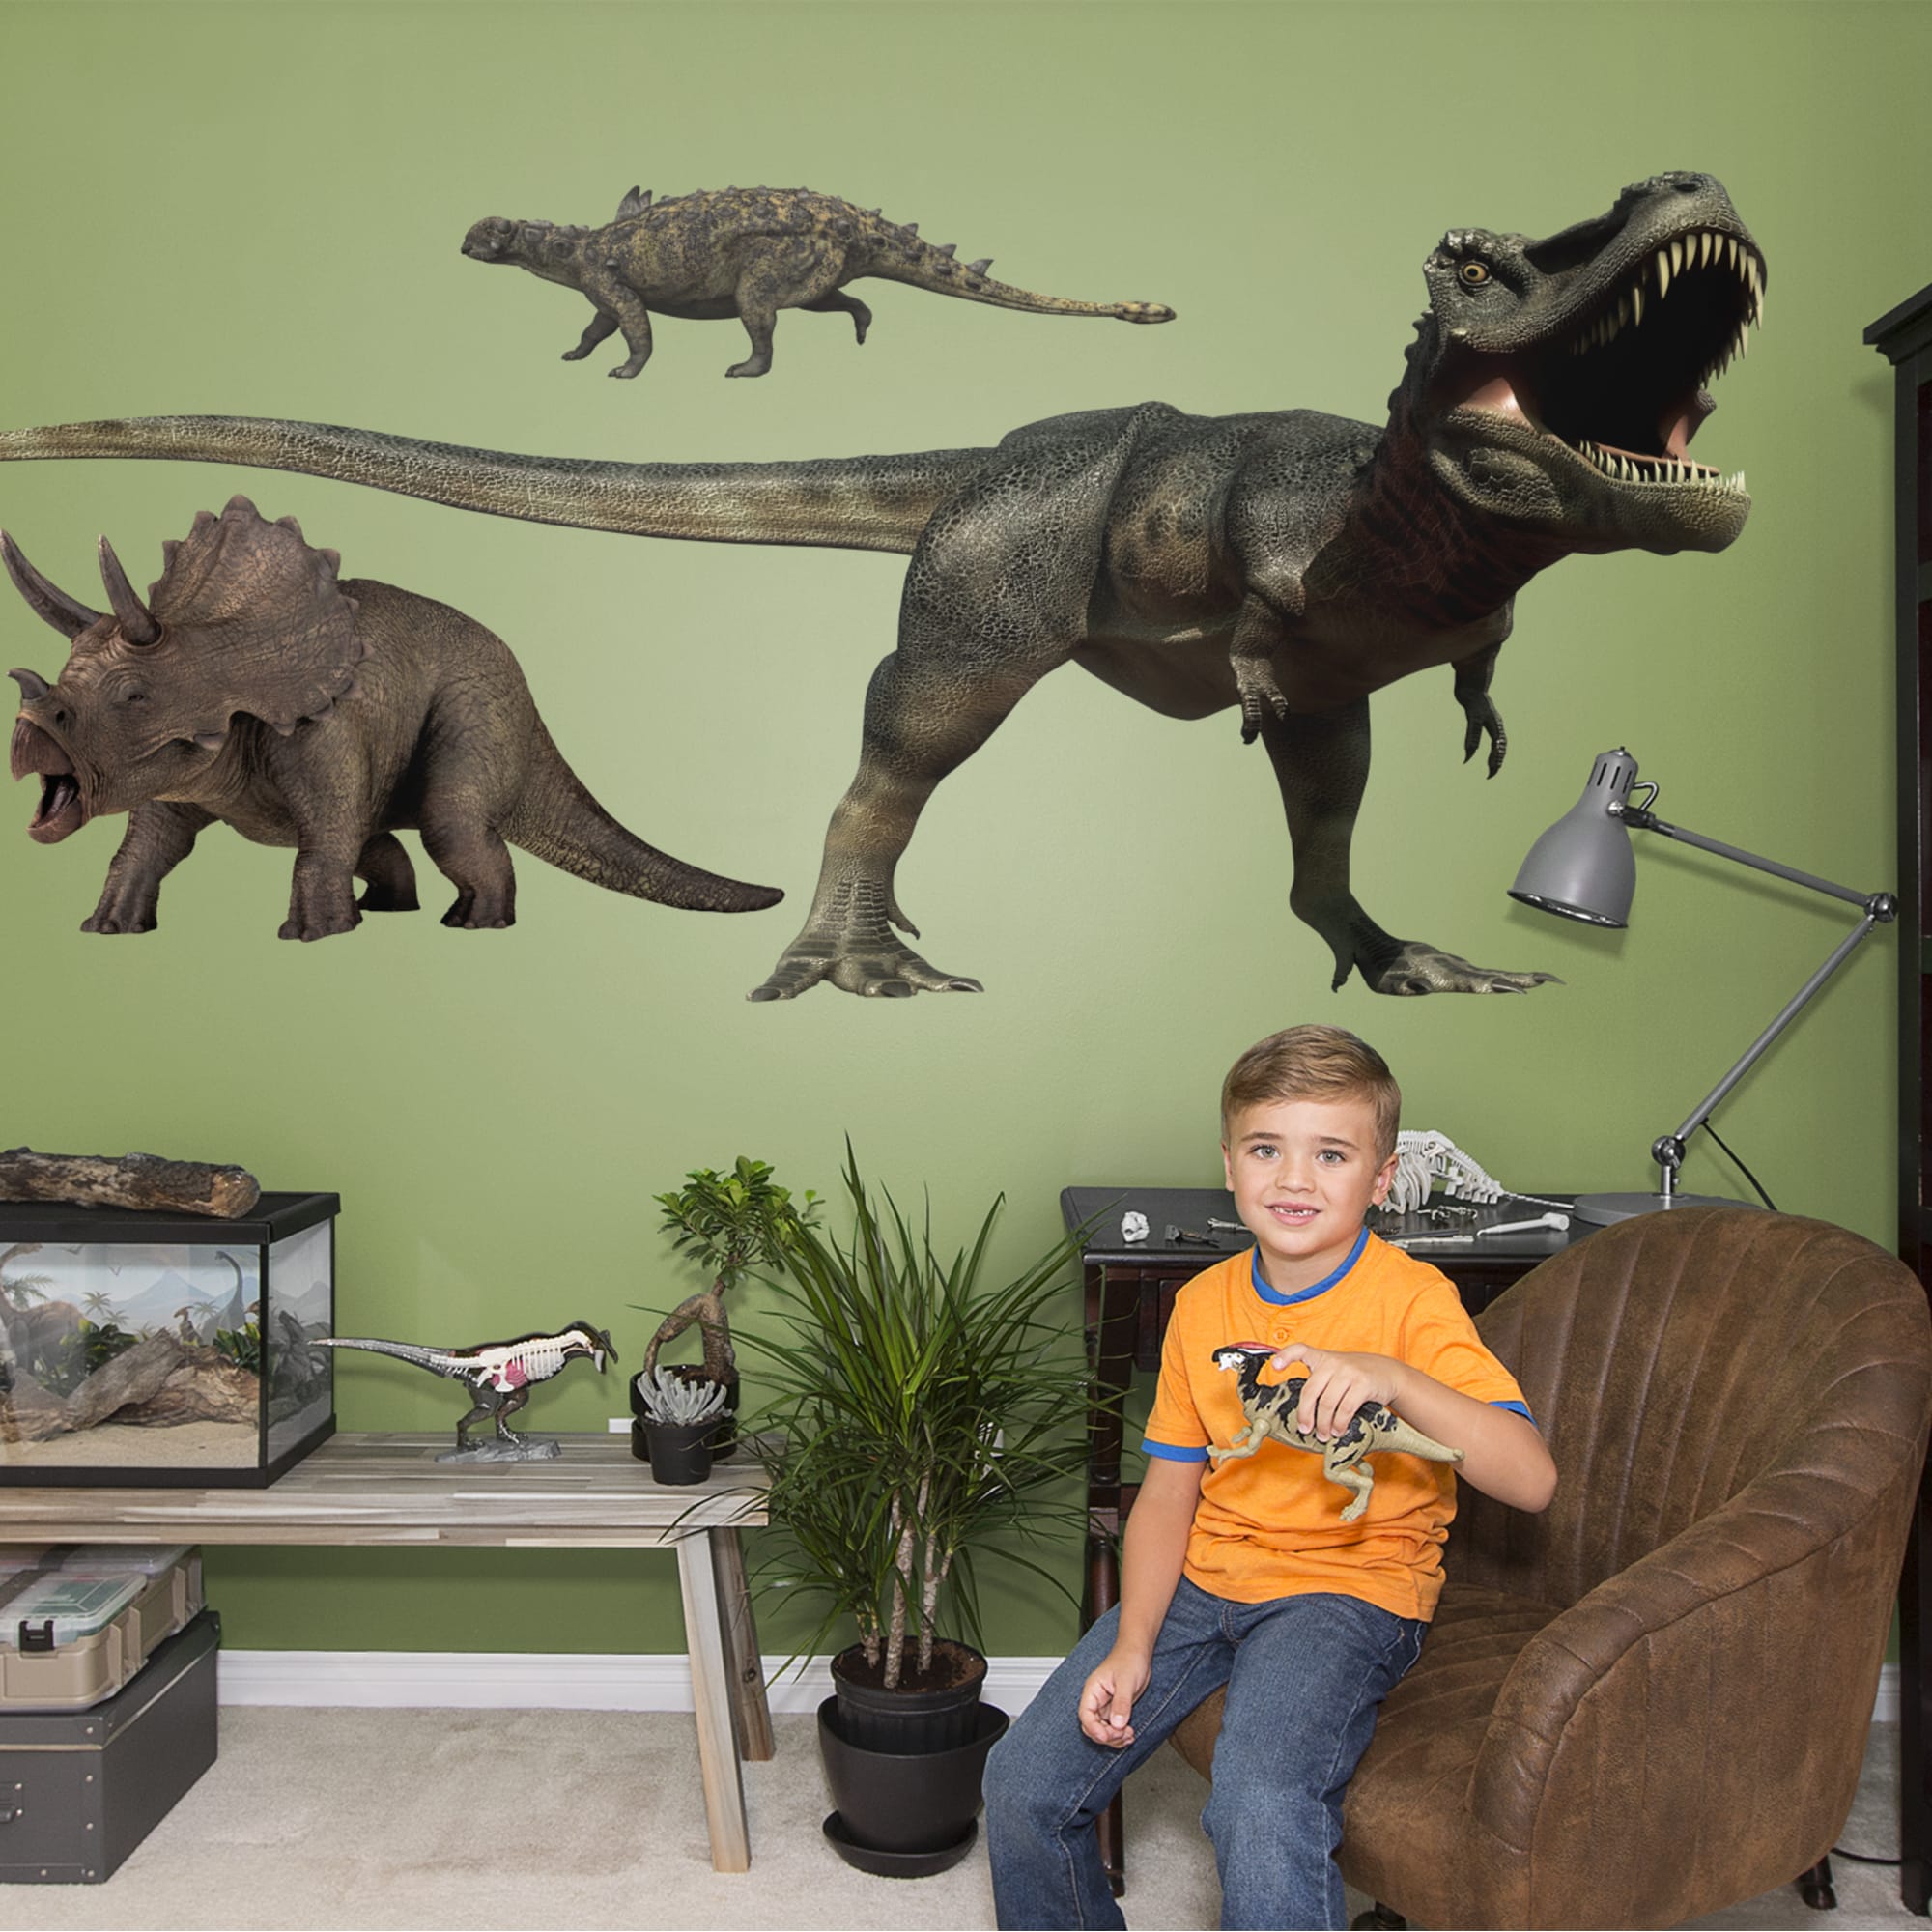 Dinosaur Collection - Removable Vinyl Decal 79.0"W x 52.0"H by Fathead